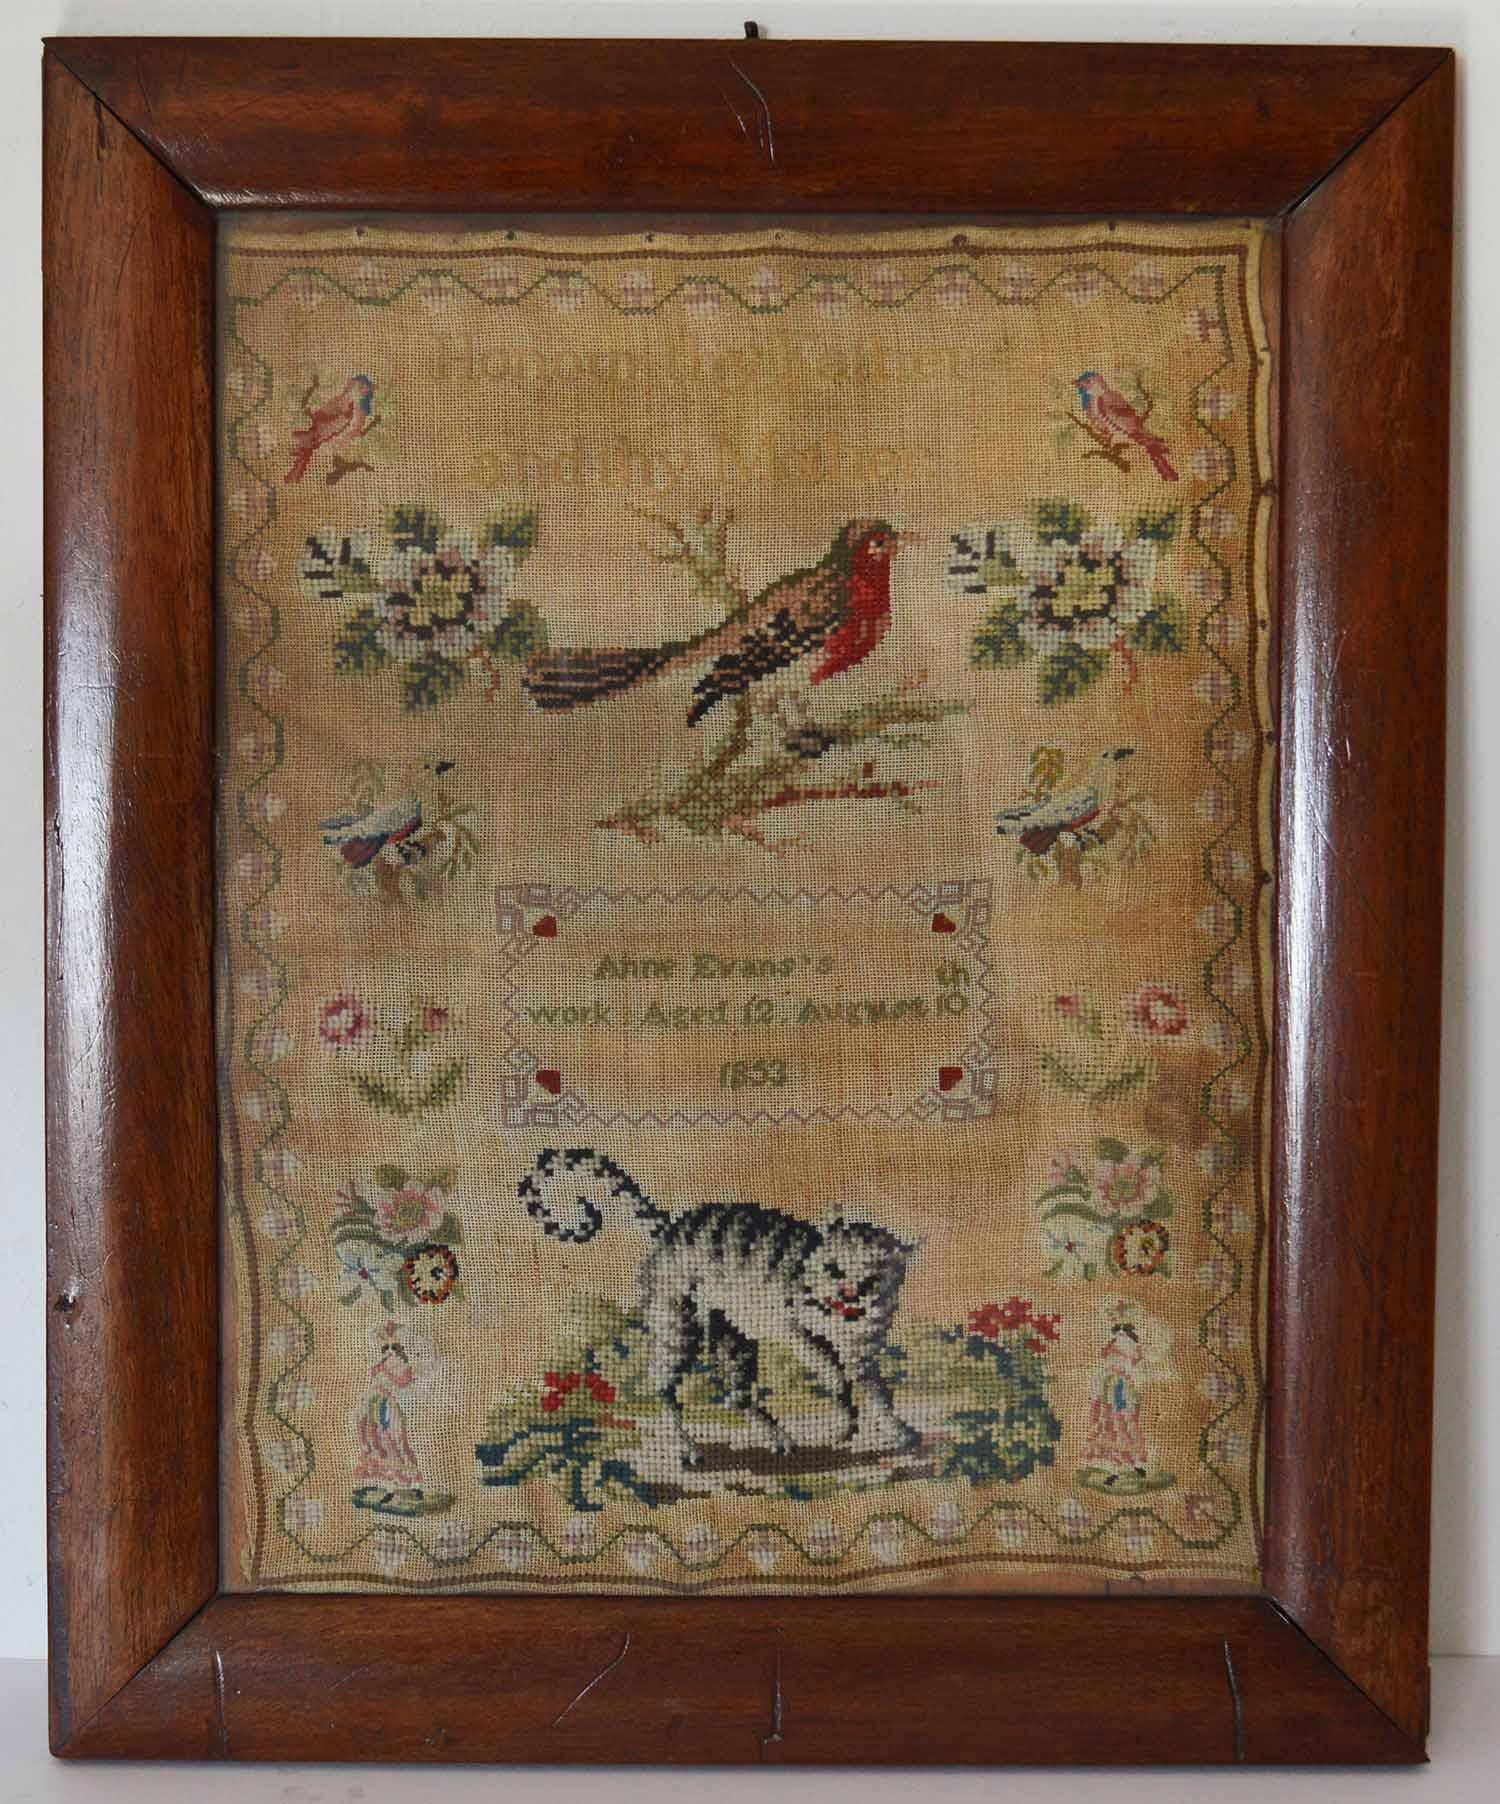 Lovely Welsh sampler with a cat and bird.

Pleasant text of Honour Thy Father and Thy Mother

By Anne Evans, 1853

Most unusual with having the wool work cat as a subject.

Original rosewood frame

The measurement given below is the frame